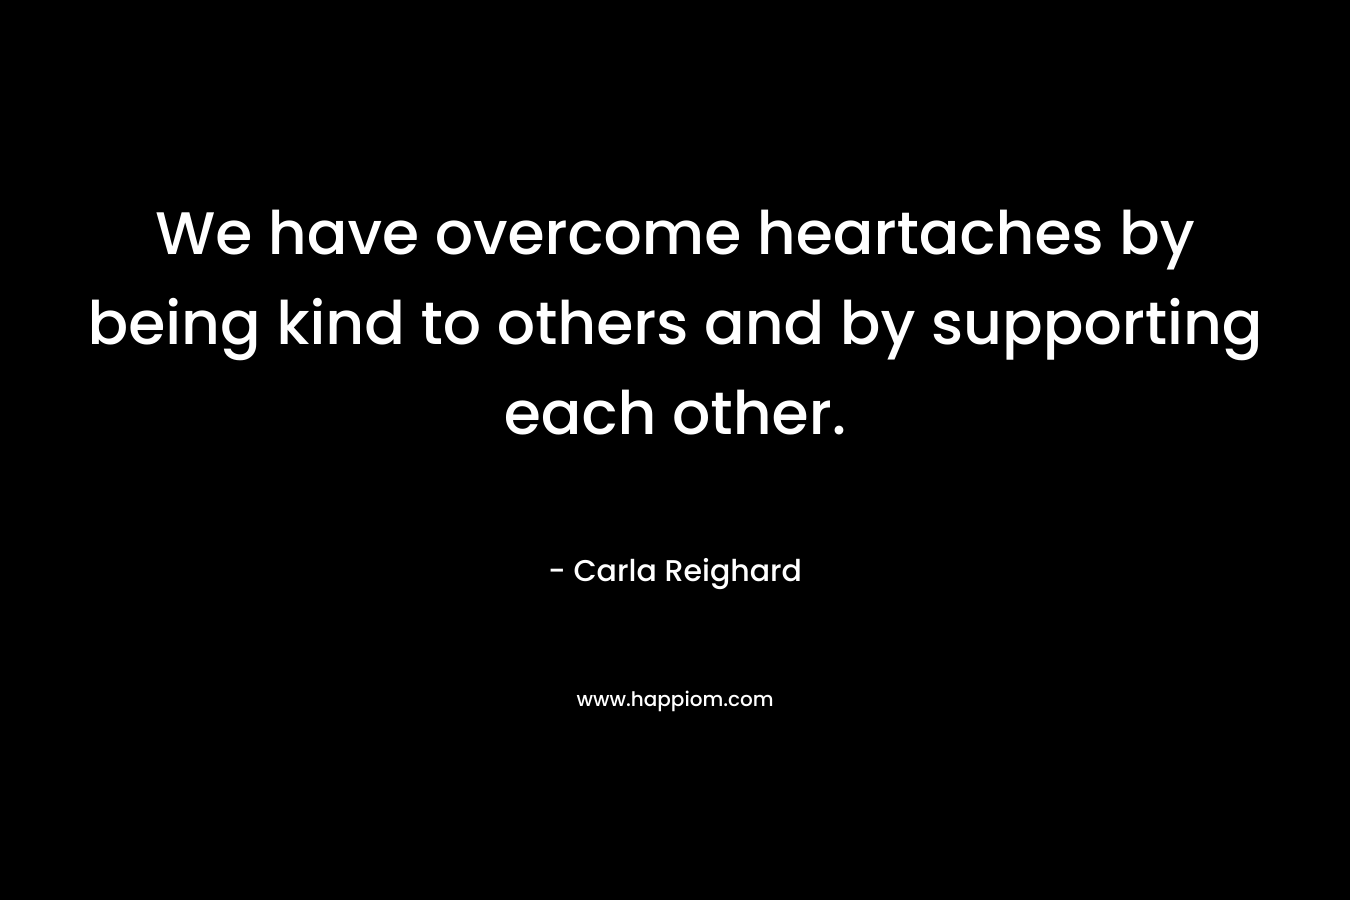 We have overcome heartaches by being kind to others and by supporting each other. – Carla Reighard